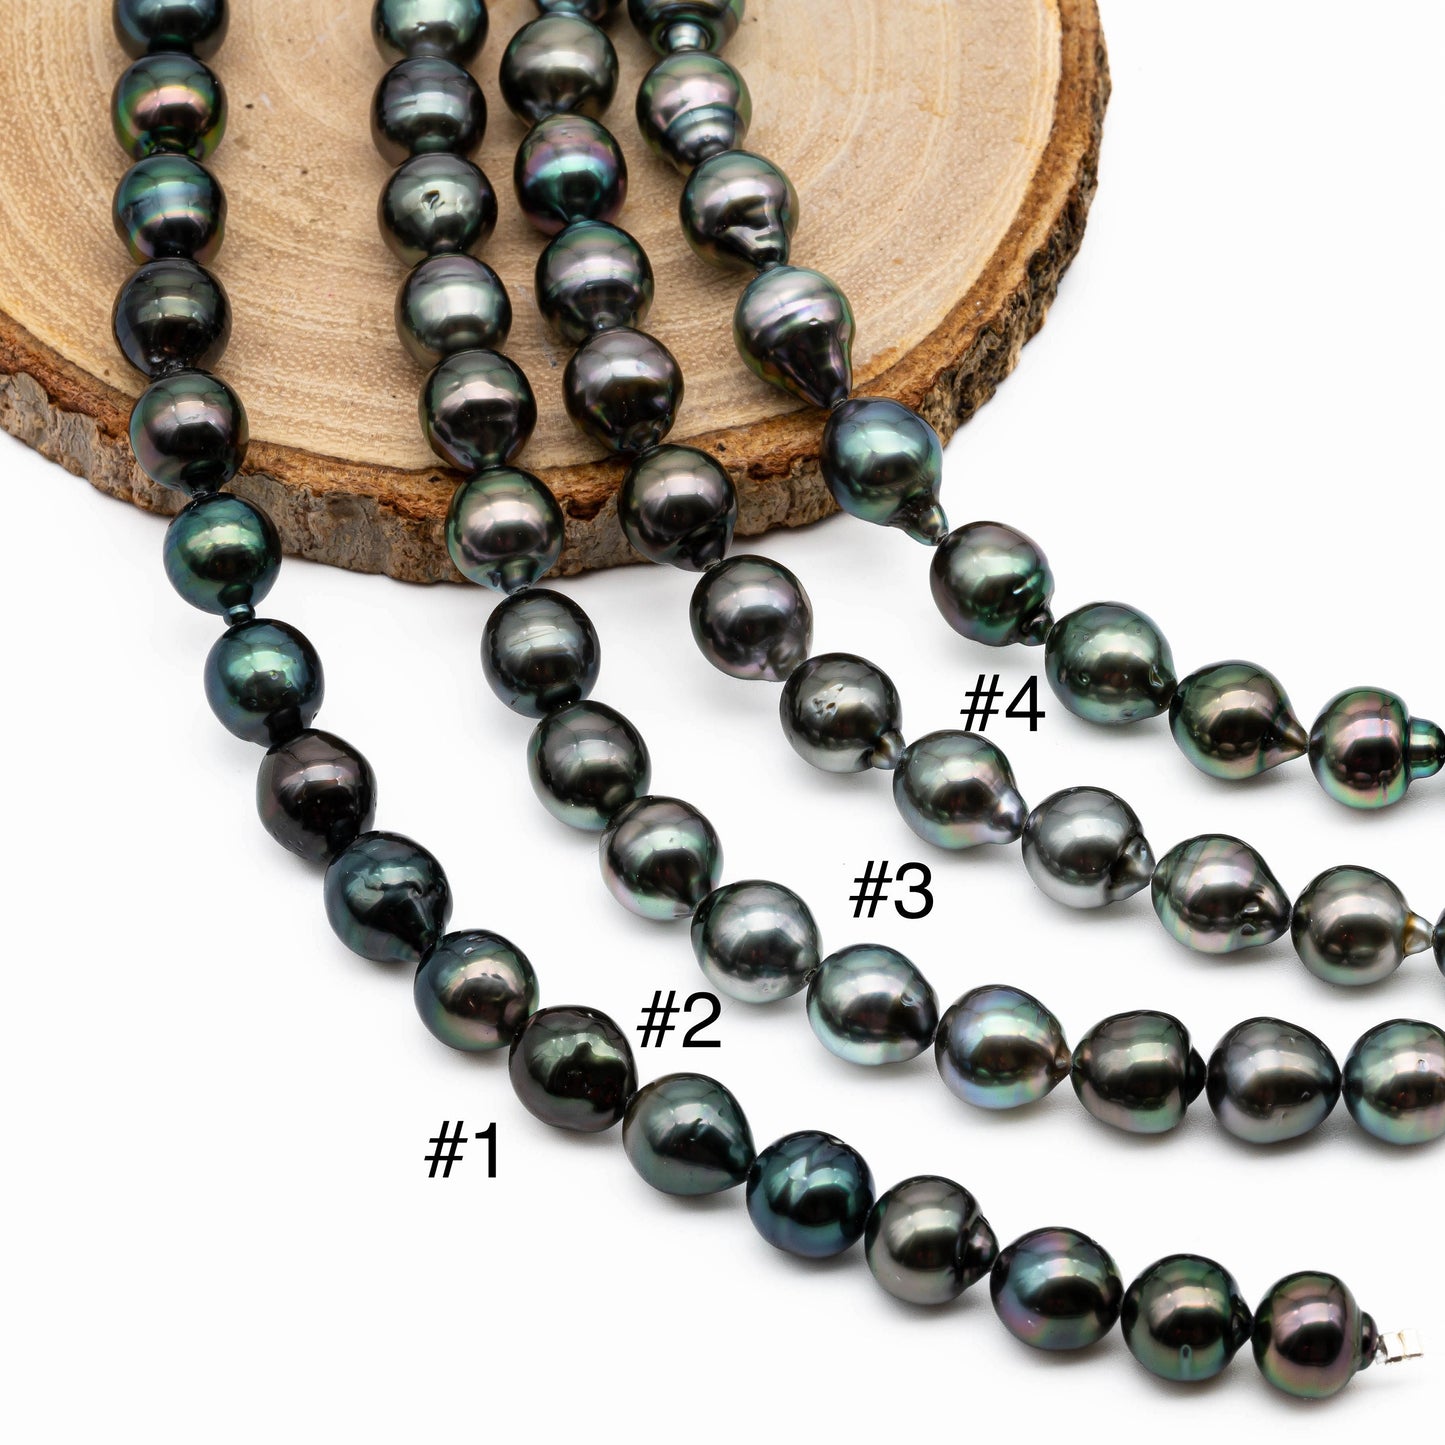 Tahitian Pearl 9-9.5mm, Teardrop or Near Round Natural Pearl Strand with High Luster, For Jewelry Making,  SKU # 1042TH